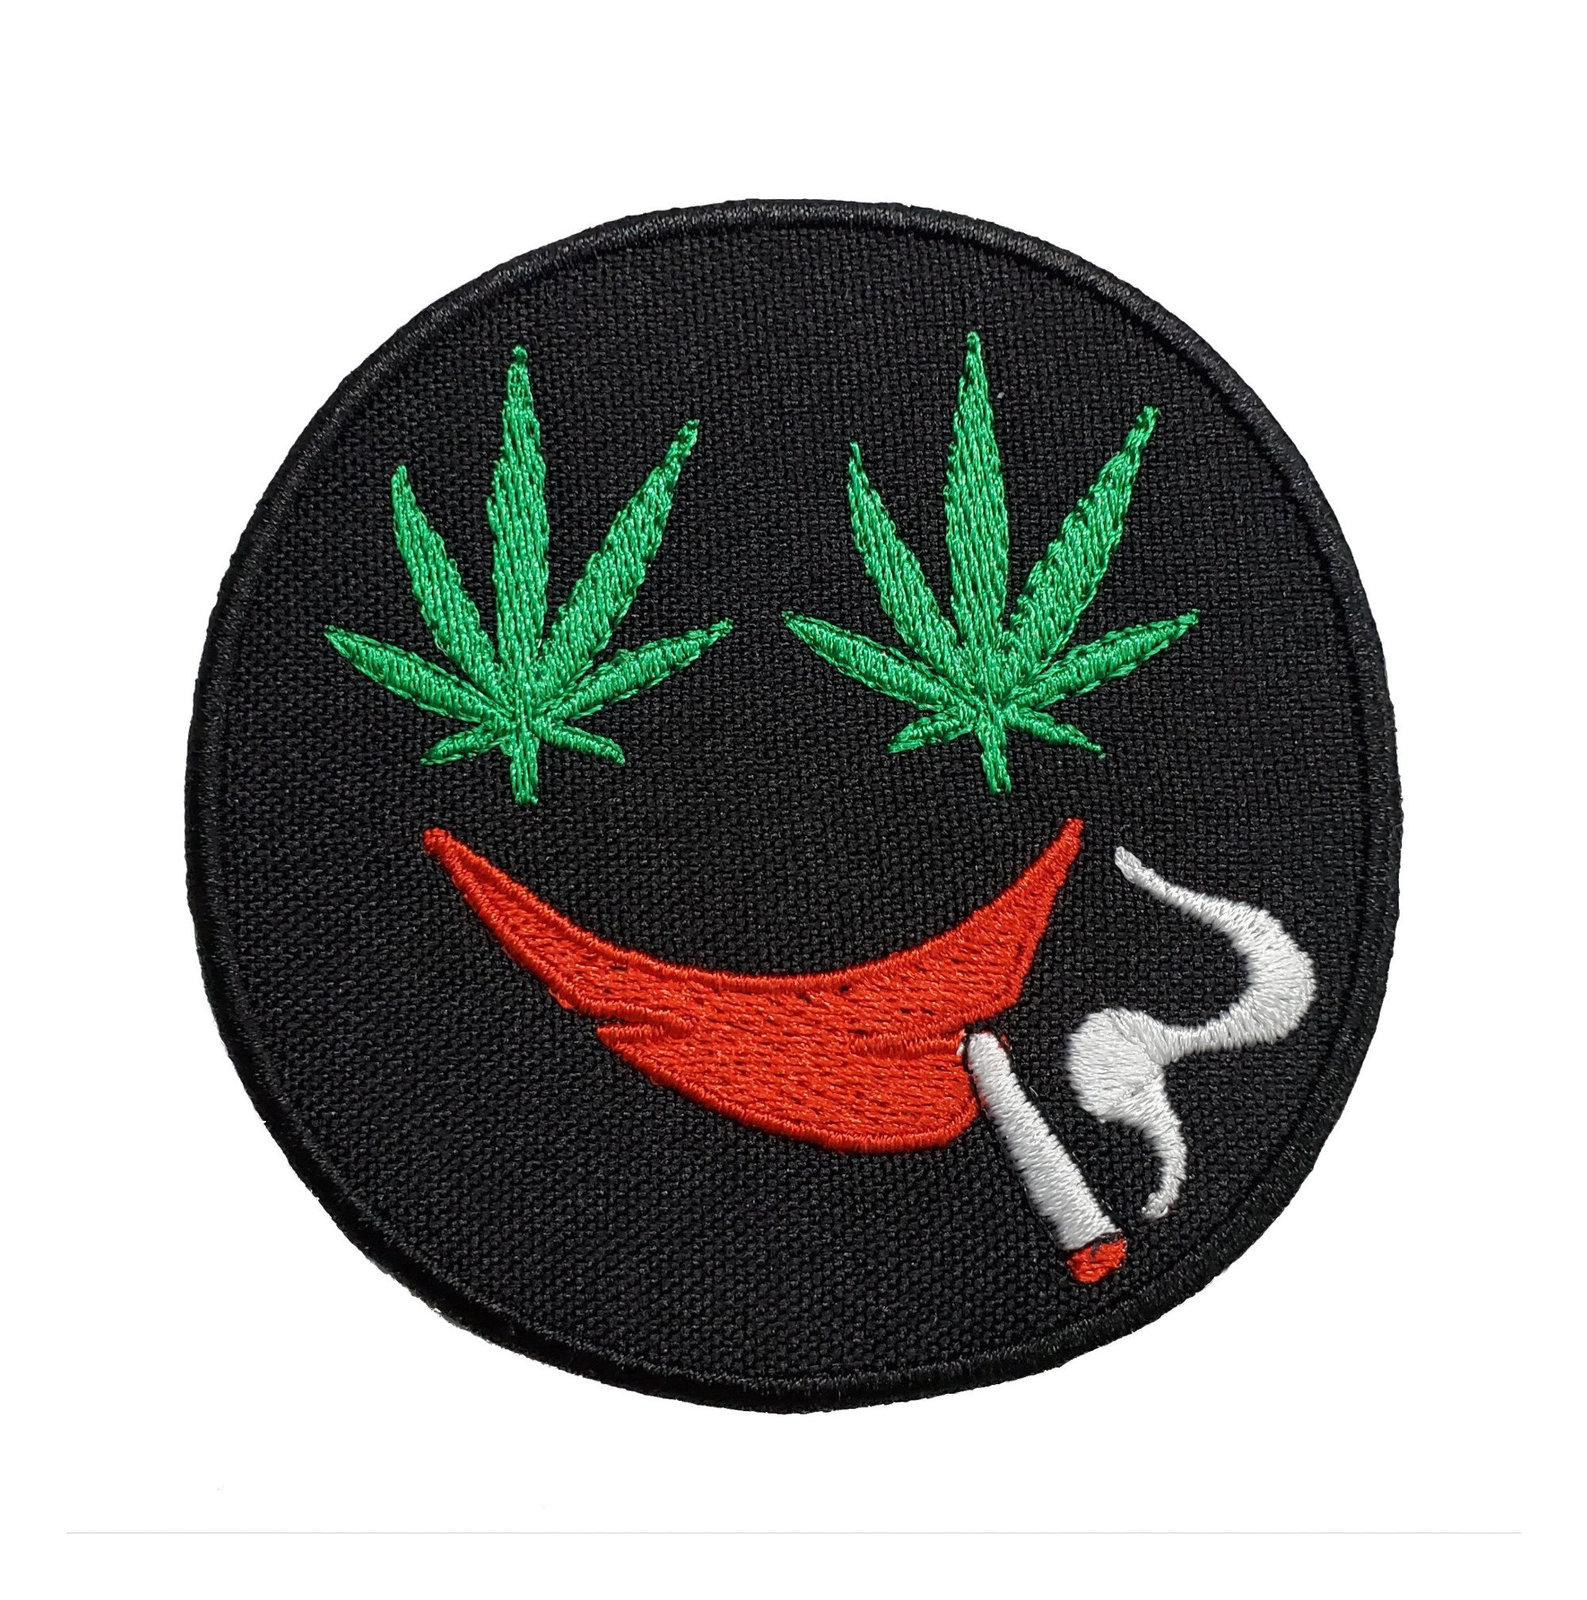 Primary image for High Times Weed Face Emoji Marijuana Embroidered Iron On Patch 3" Cannabis Hemp 